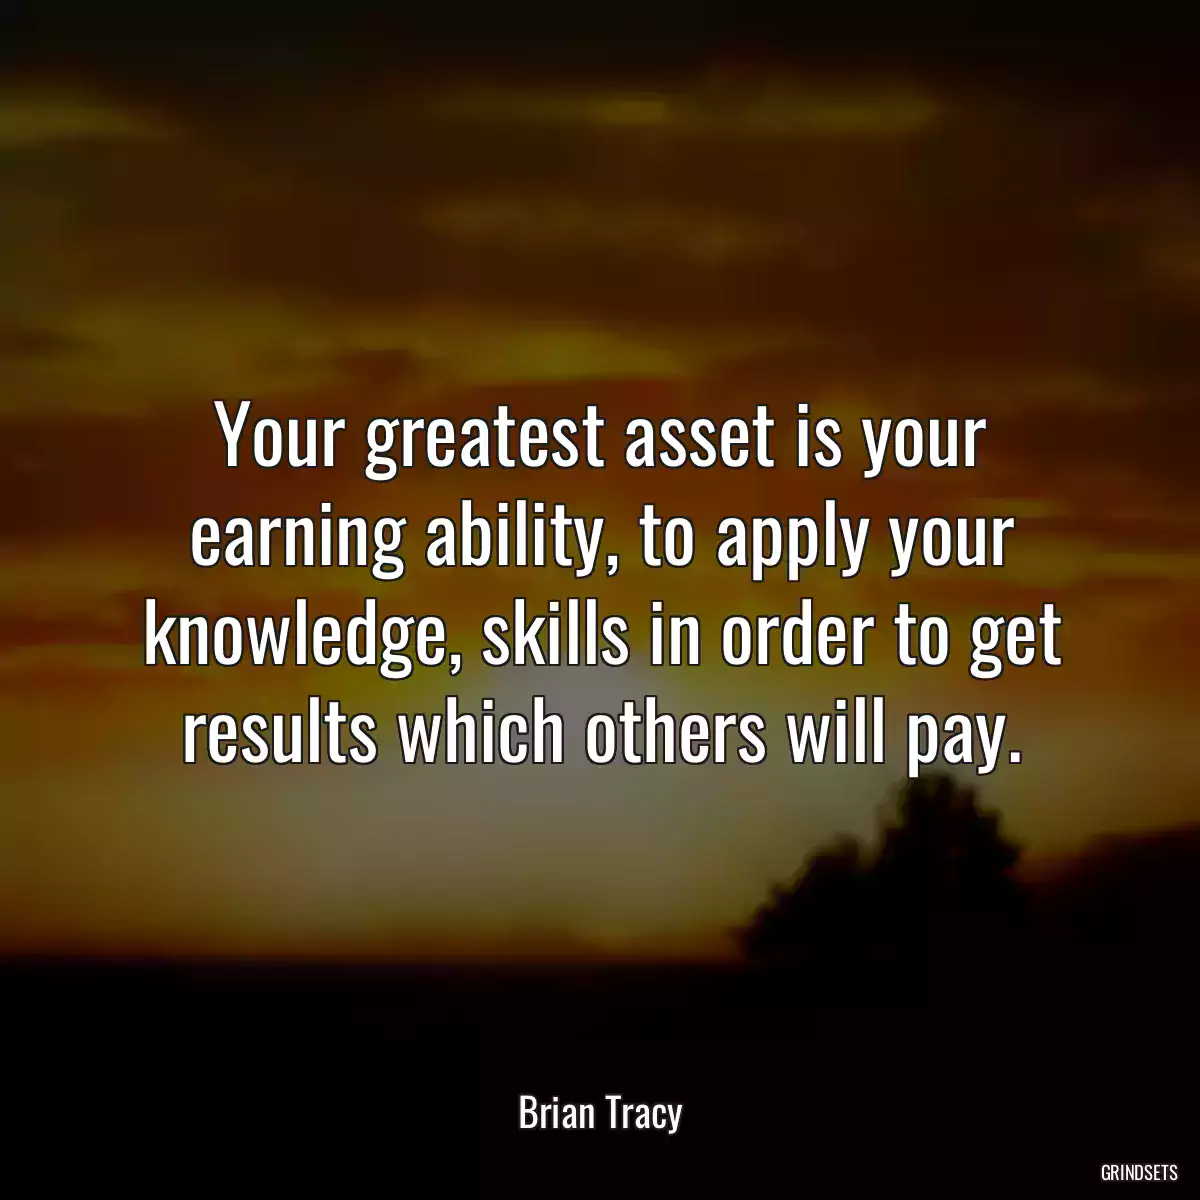 Your greatest asset is your earning ability, to apply your knowledge, skills in order to get results which others will pay.